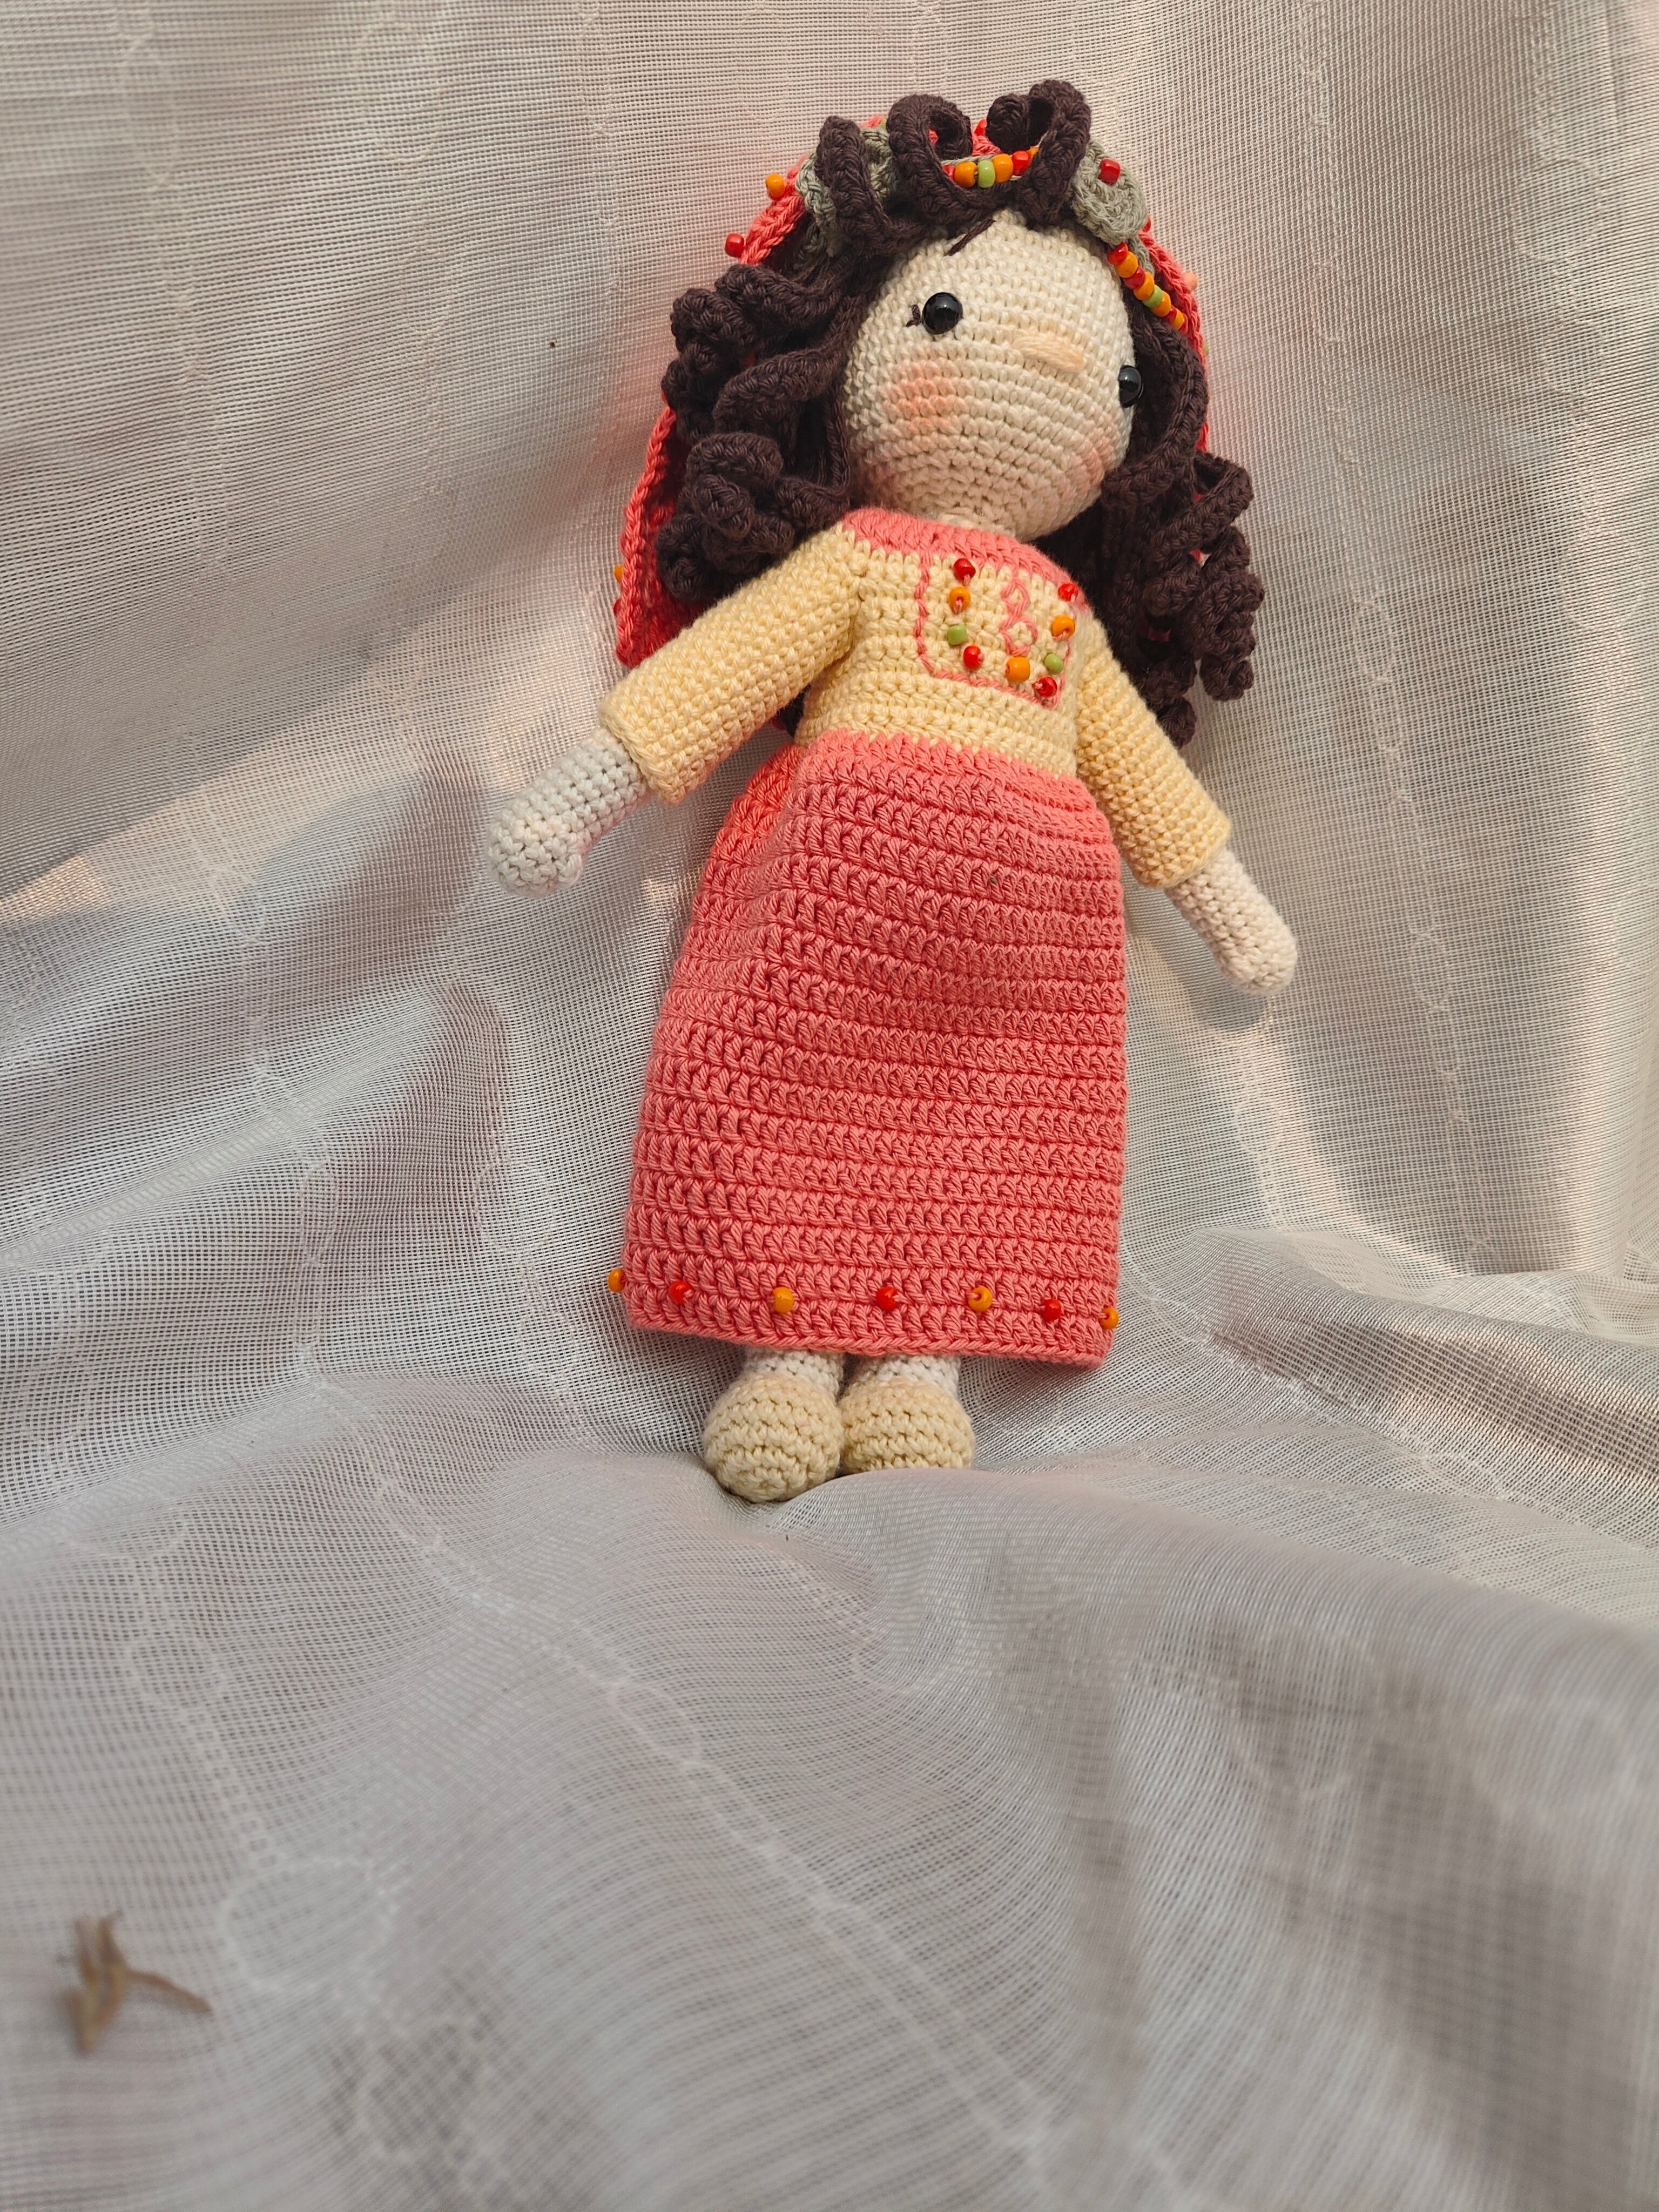 Munni Doll - For Babies and Kids